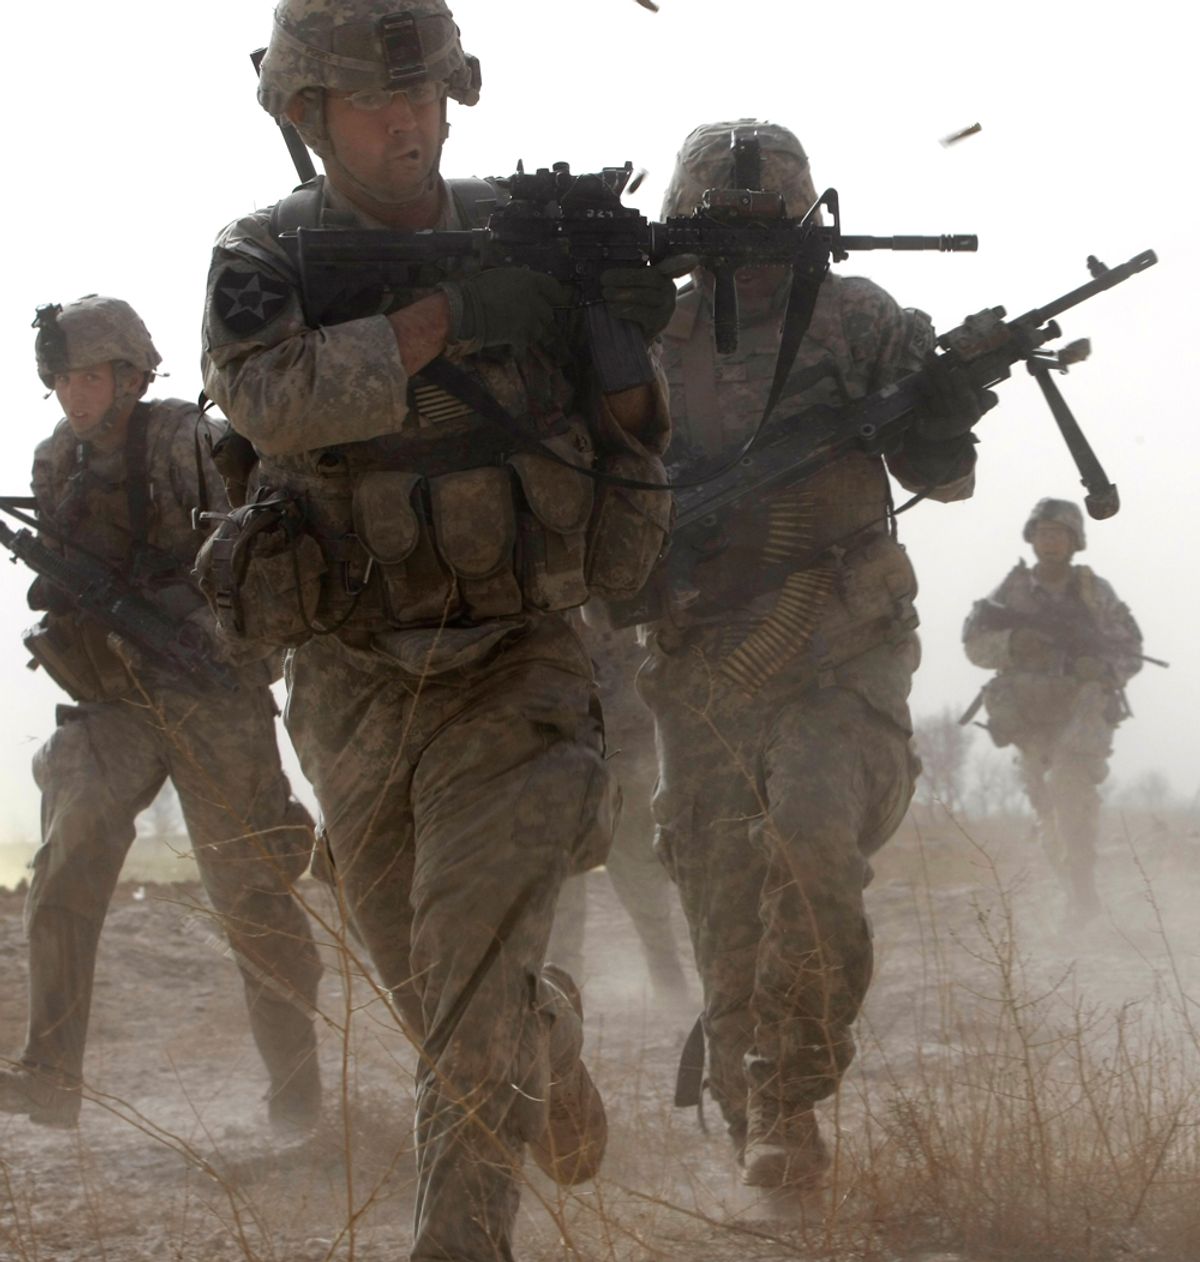 A U.S. soldier returns fire as others run for cover during a firefight with insurgents in the Badula Qulp area, West of Lashkar Gah in Helmand province, southern Afghanistan, Feb. 14, 2010.